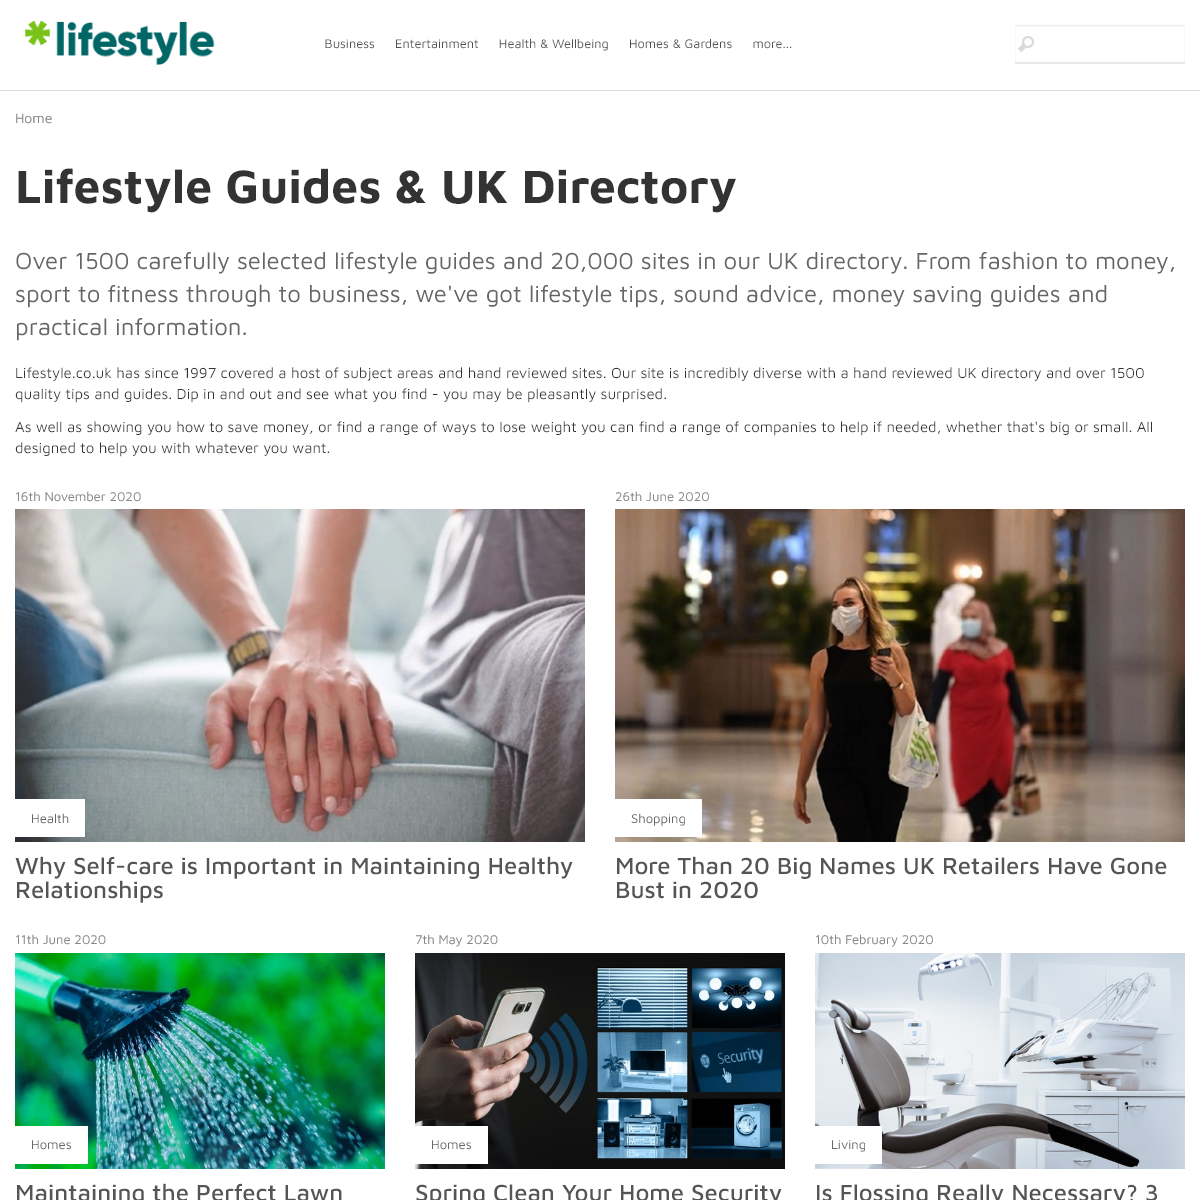 A complete backup of lifestyle.co.uk